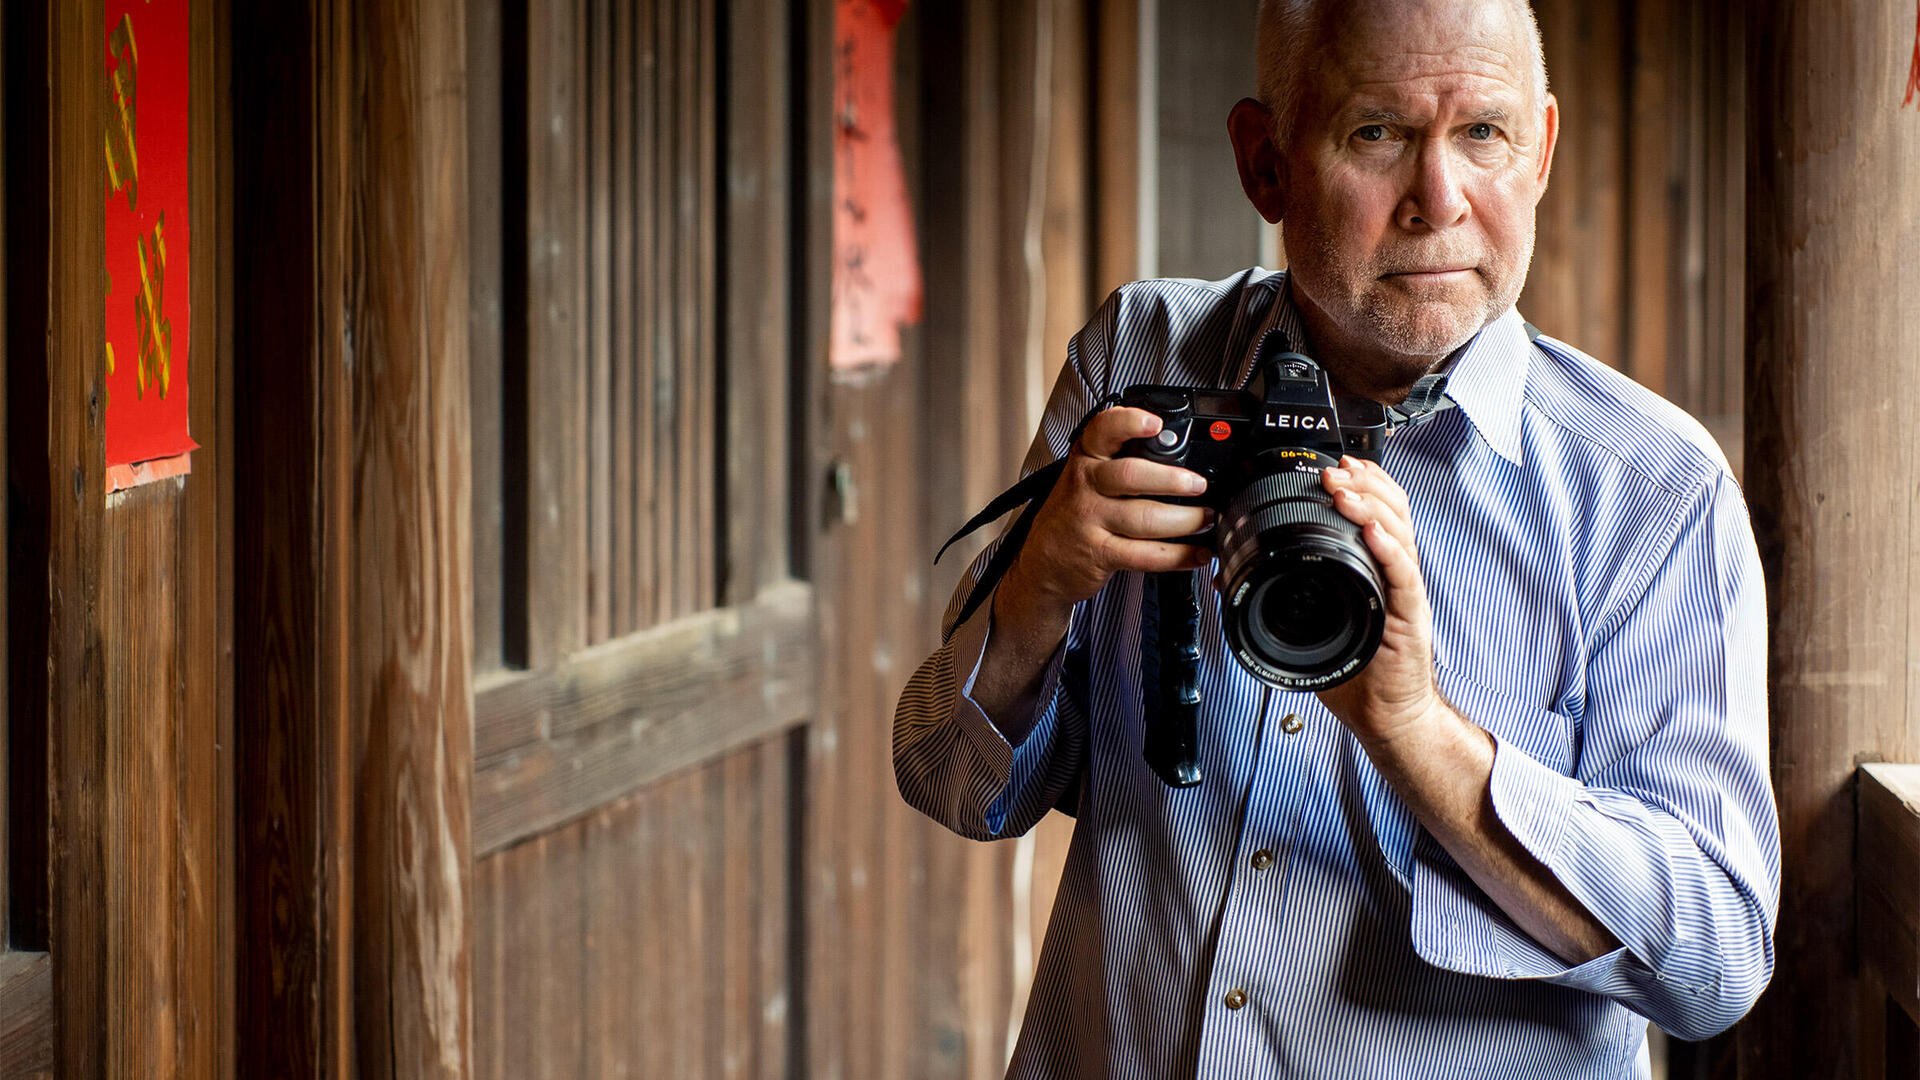 Steve McCurry: Capturing the Human Experience Through the Lens